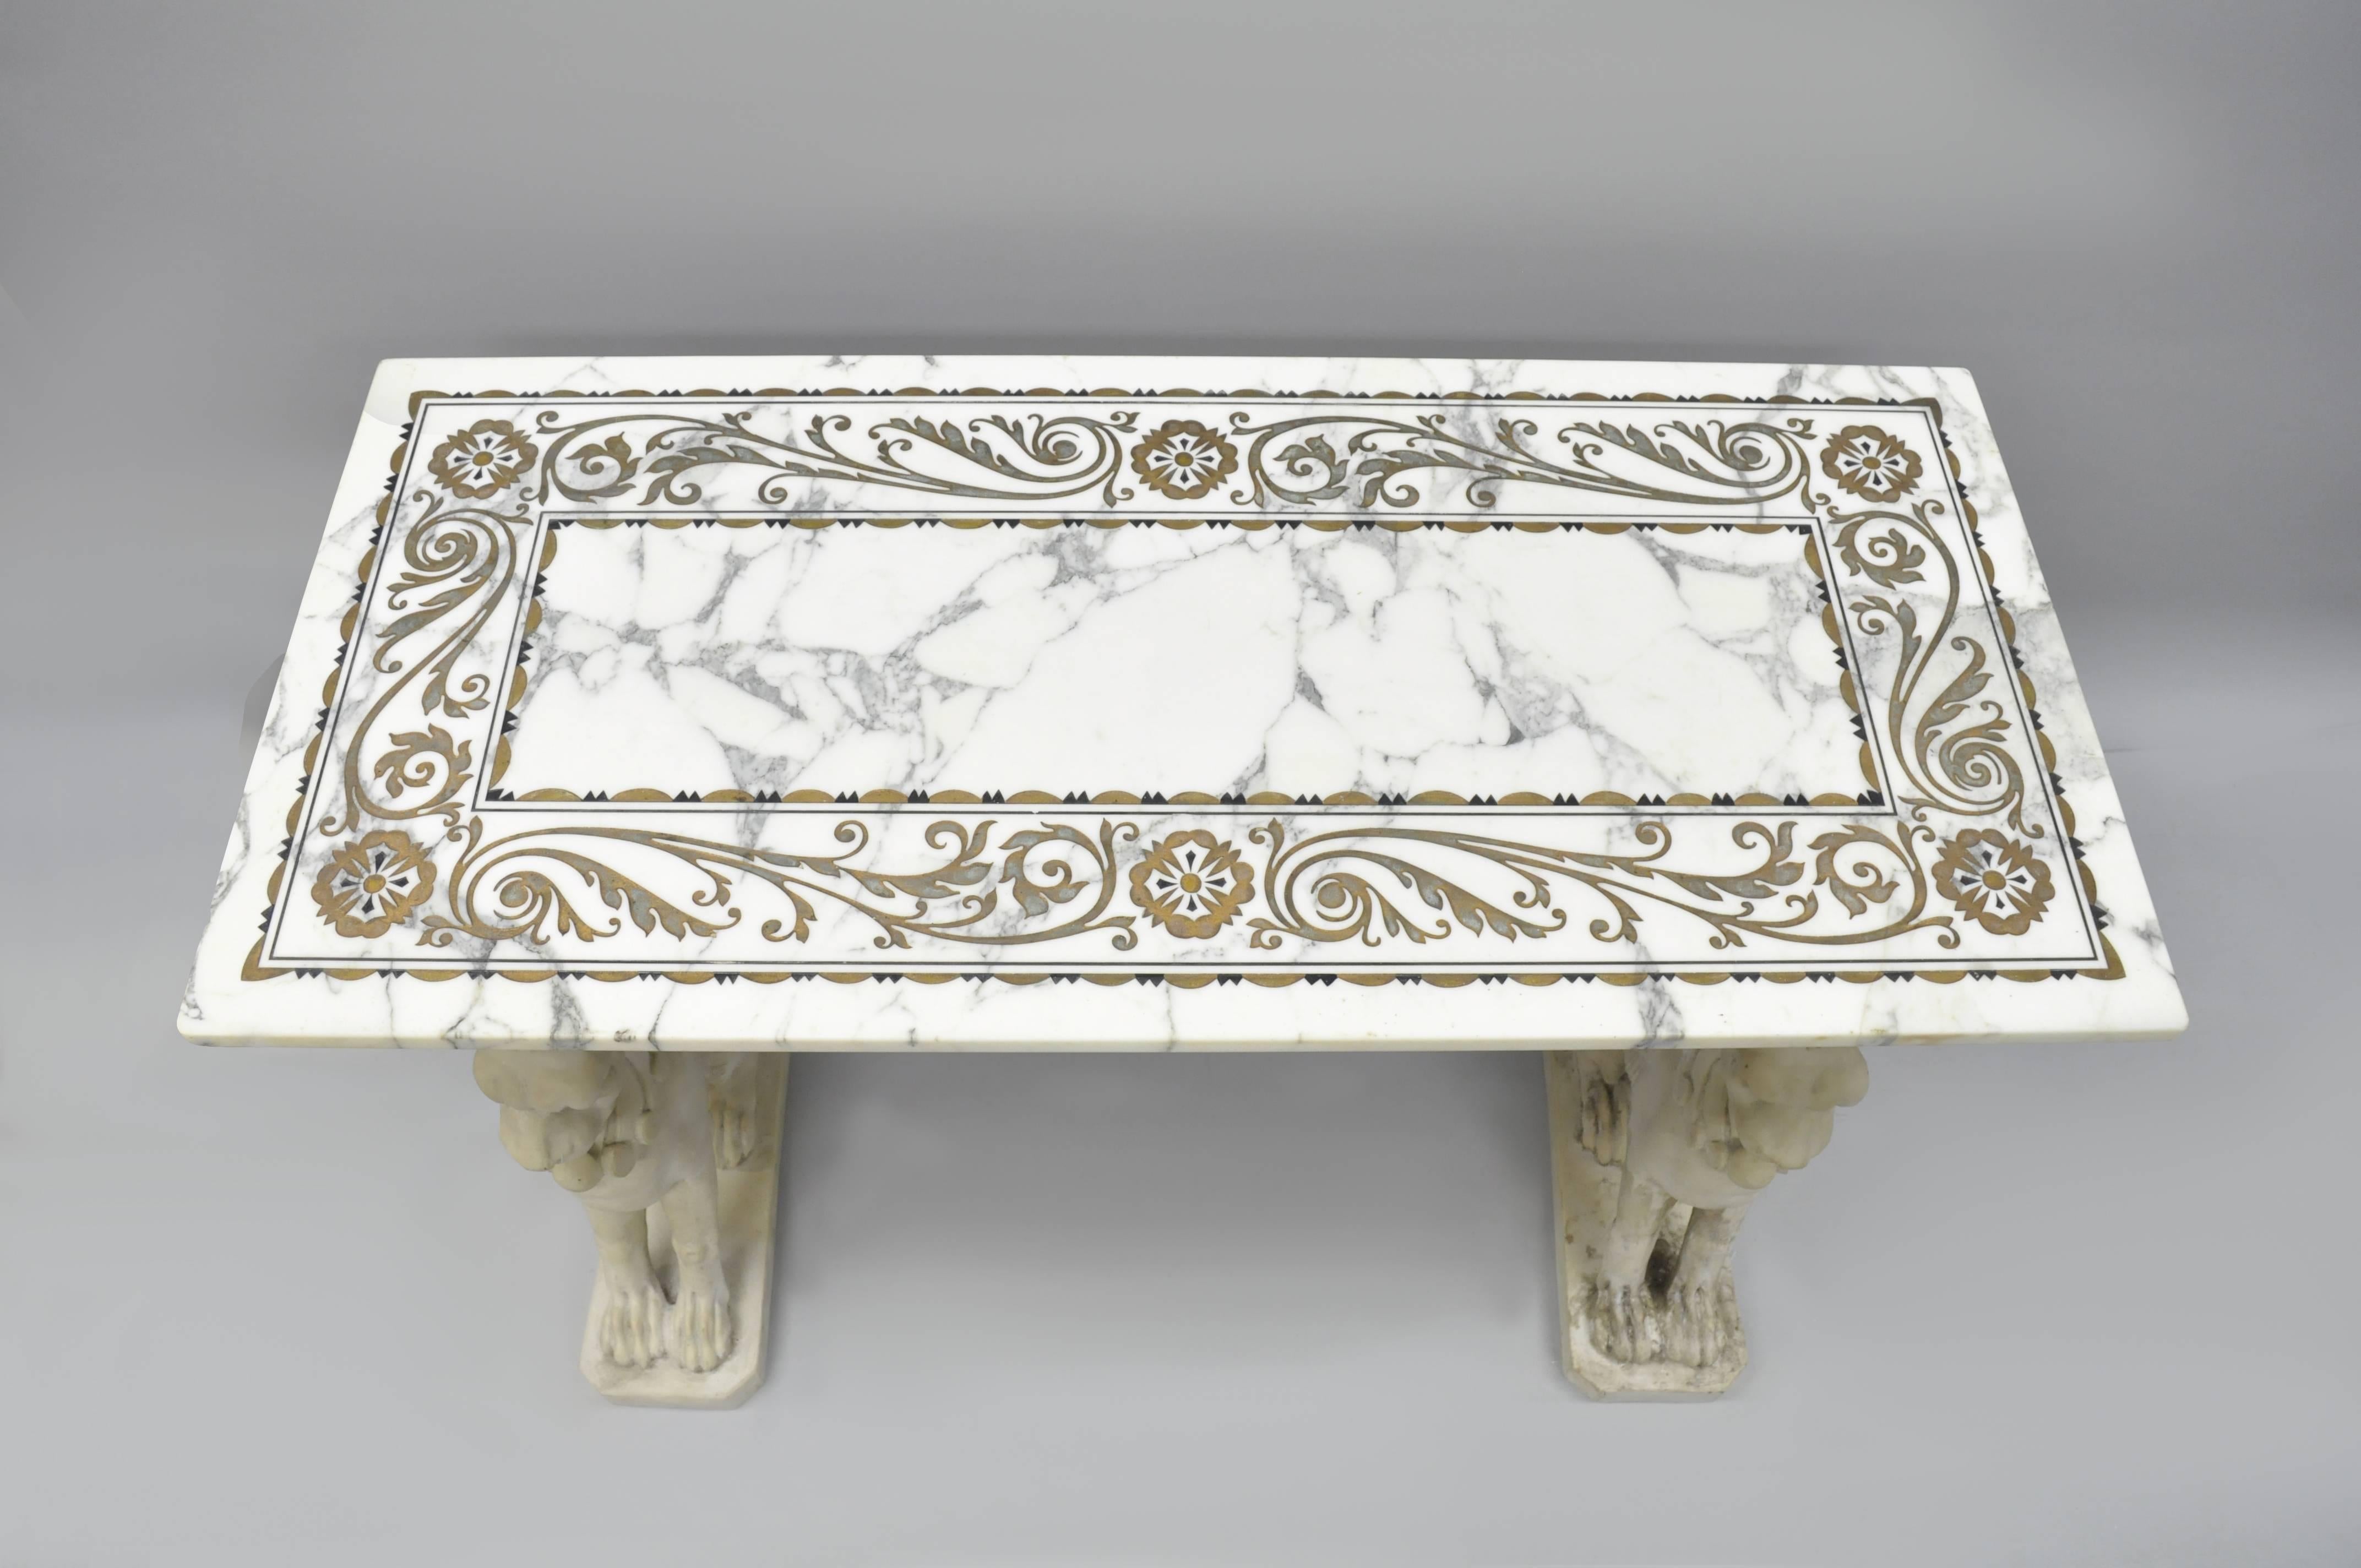 20th Century Italian Neoclassical Style Marble-Top Console Hall Table with Winged Griffins